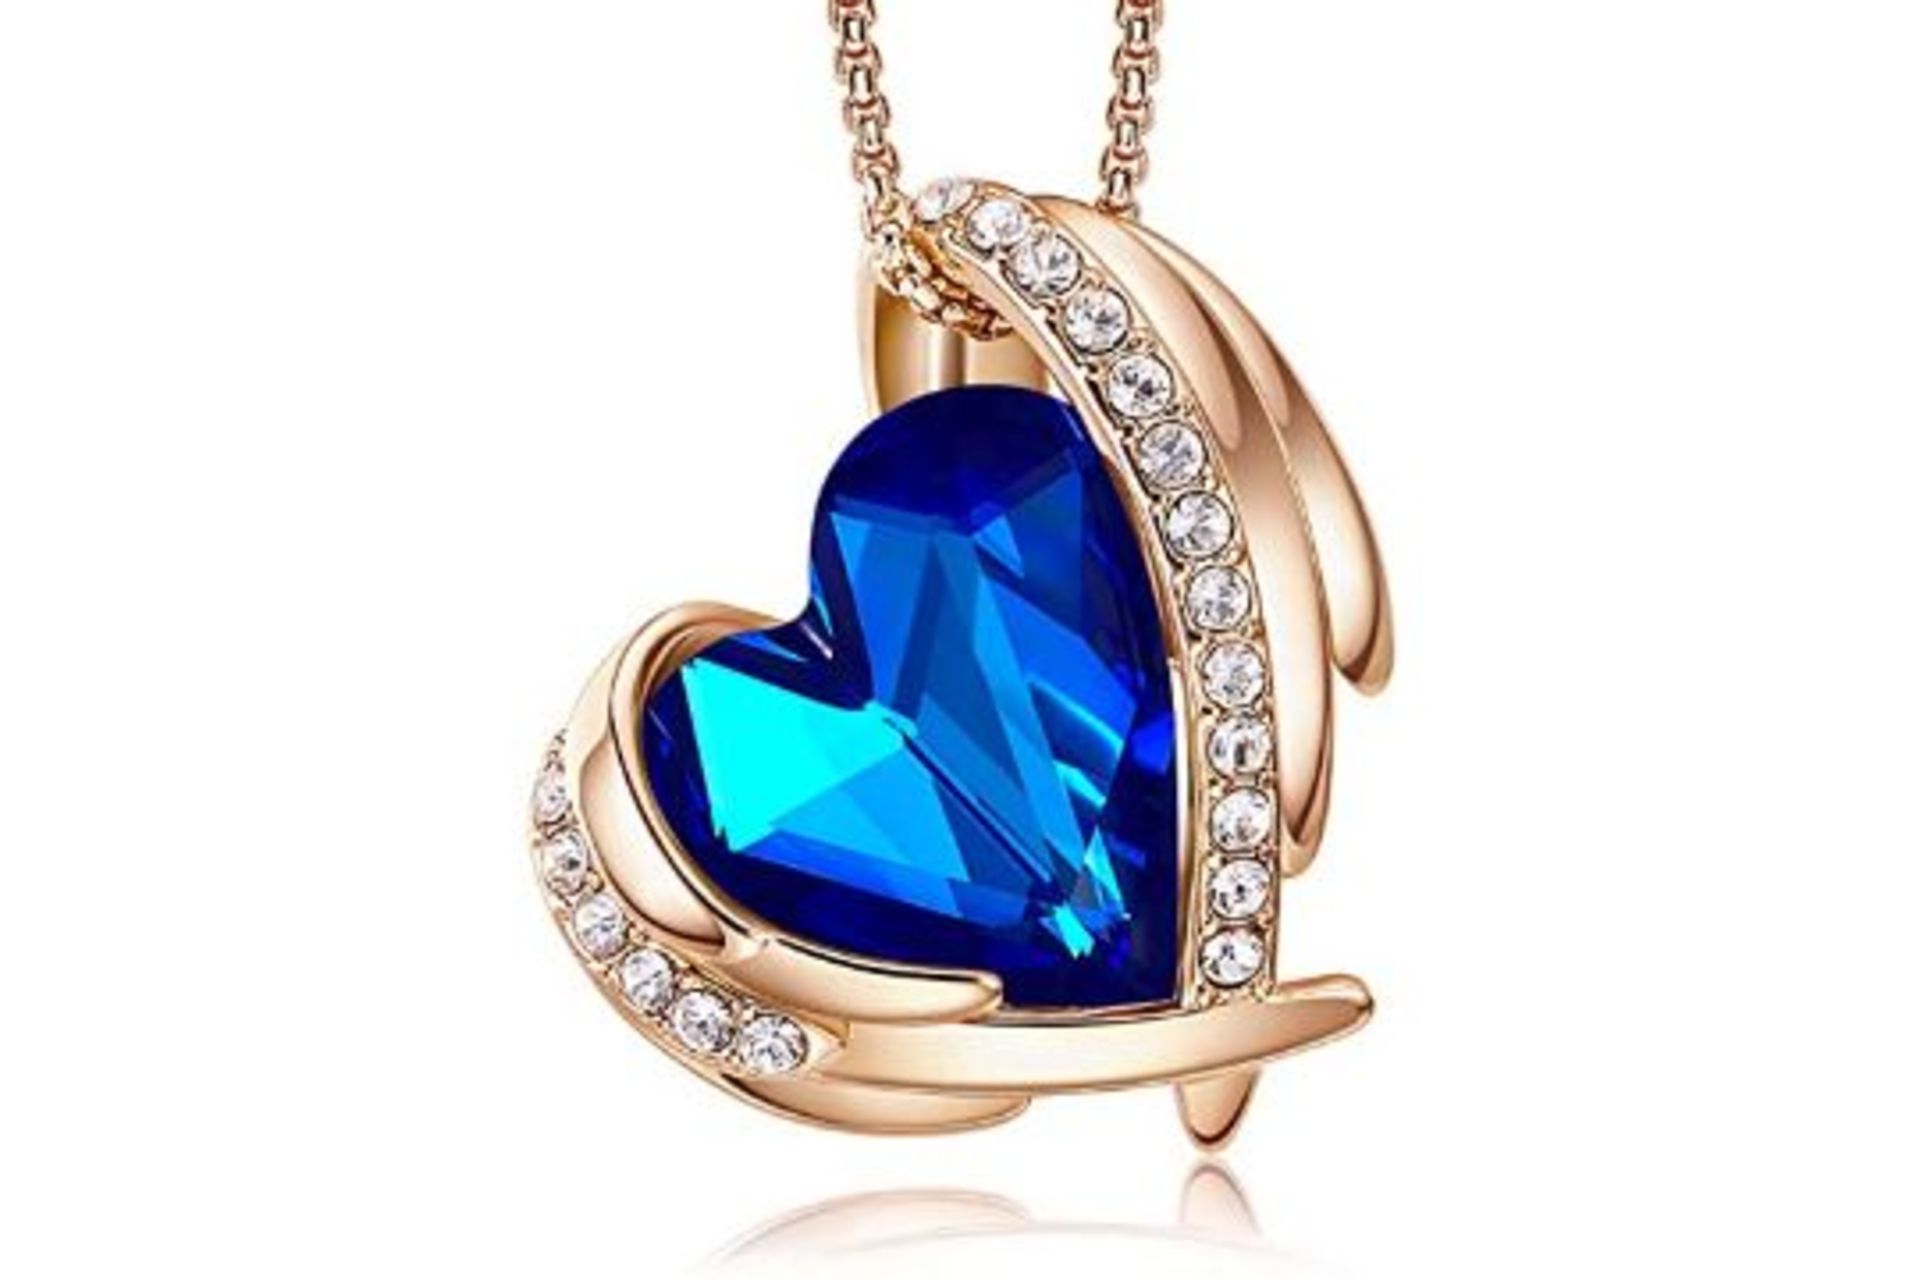 New Blue Love Heart Crystal Pendant Necklace - RRP £59.99. - Image 2 of 3